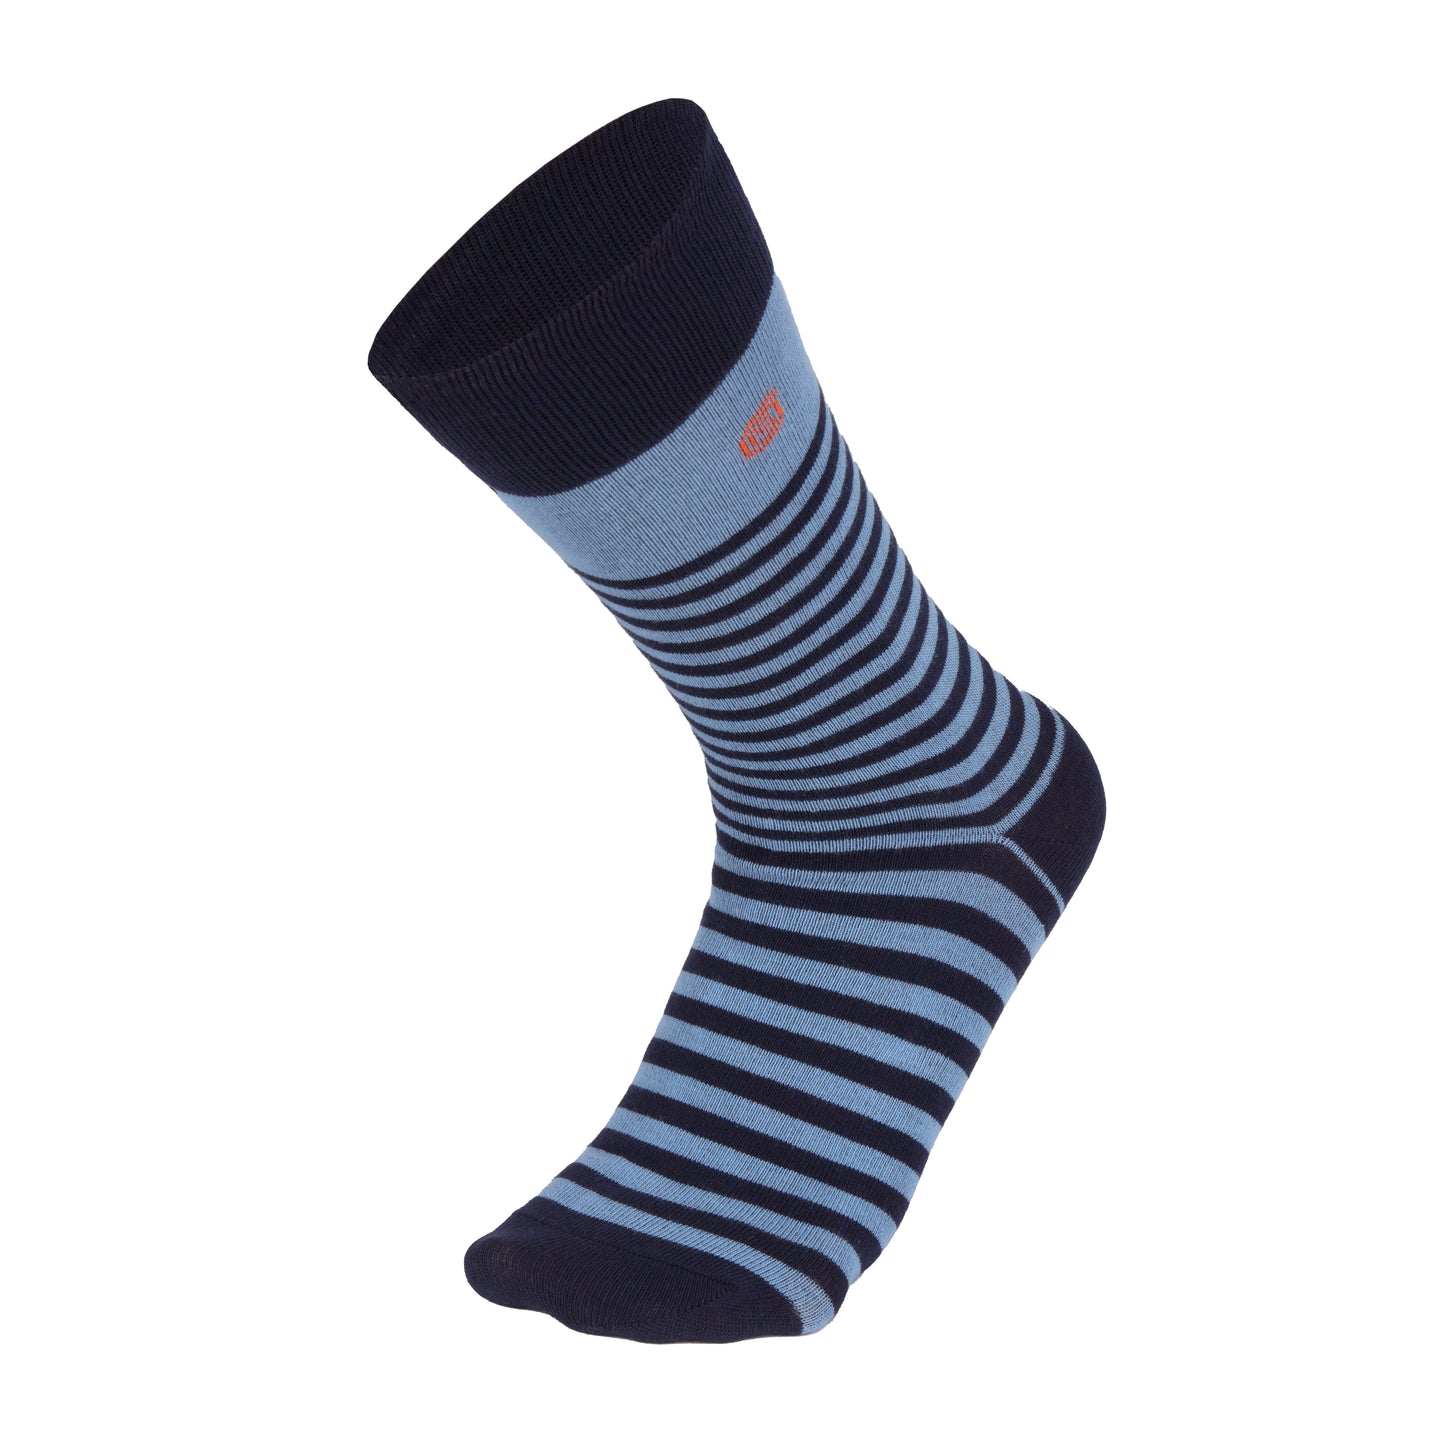 Royal blue striped high, classic, crew length socks – 3 or 6 pairs pack